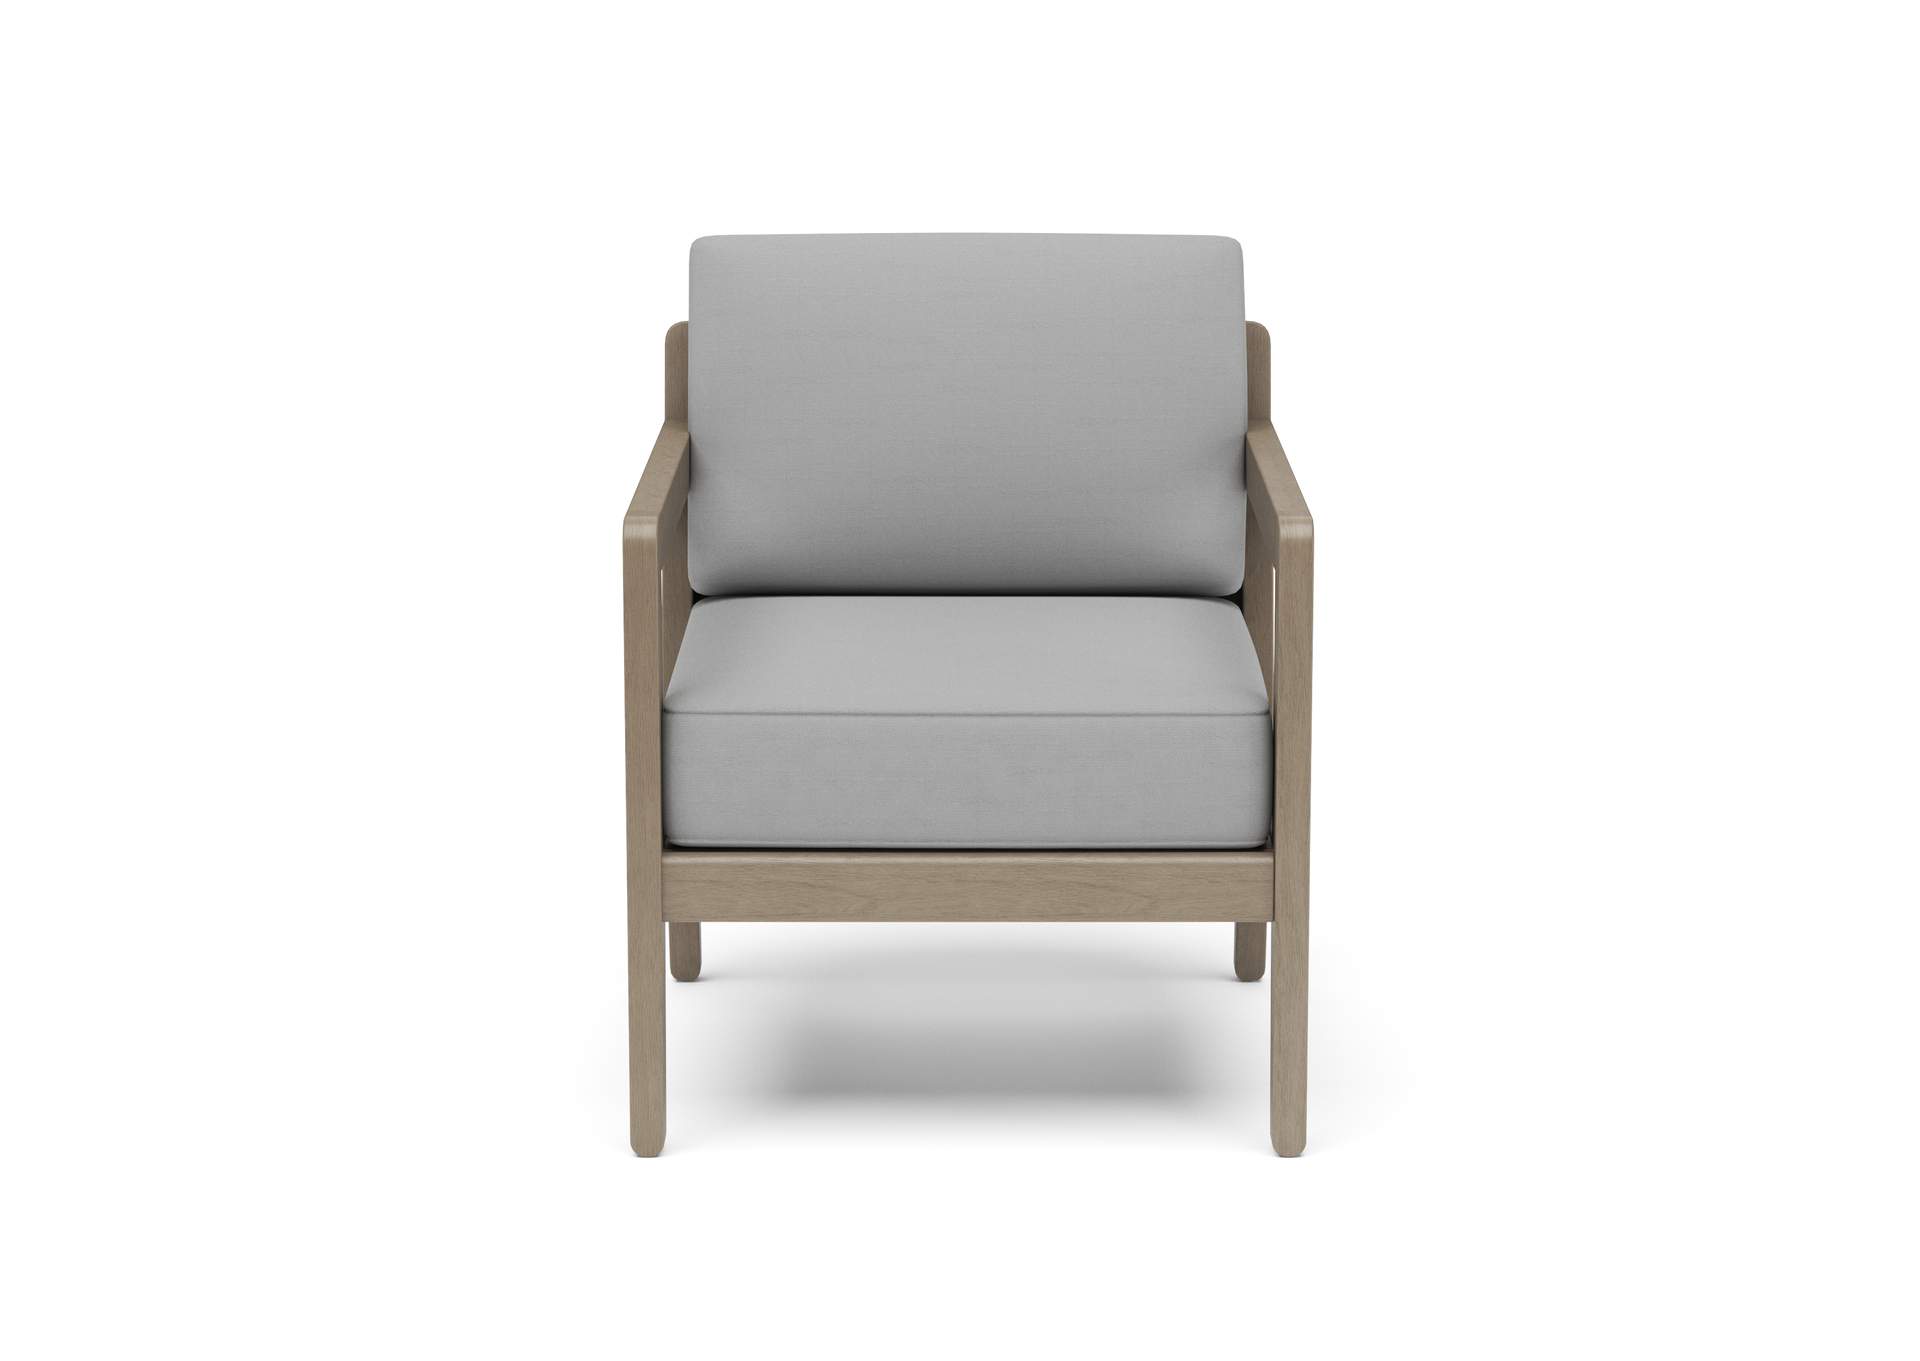 Sustain Outdoor Lounge Armchair By Homestyles,Homestyles